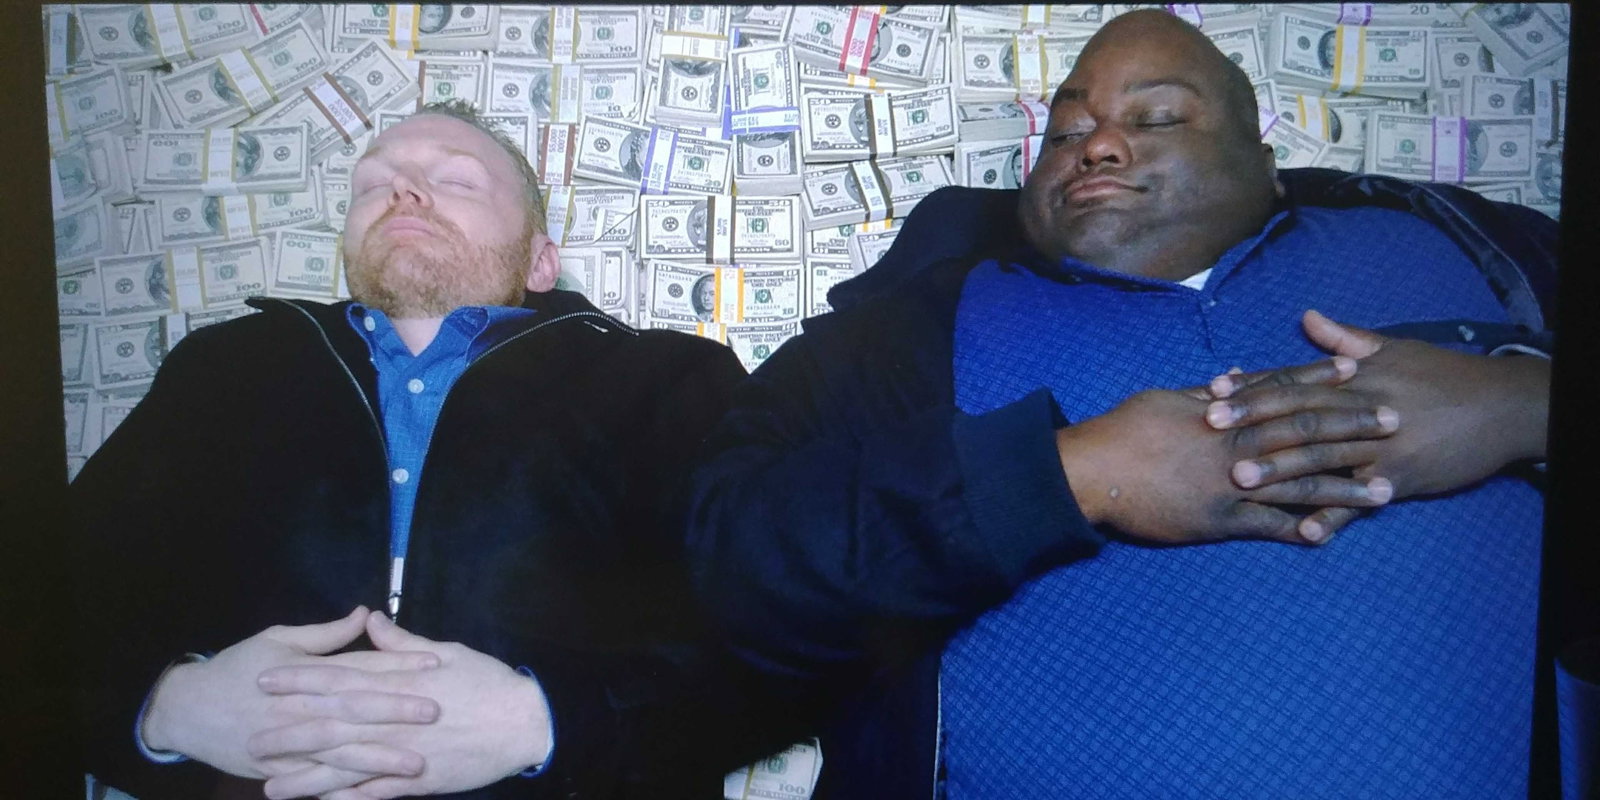 Watch the Photo by the5impleton with the username @the5impleton, who is a verified user, posted on August 10, 2017 and the text says 'This is money Huell and Kuby.

Reblog in the next 5 minutes and money will find its way to you in one business day #breaking  #bad  #huell  #babineaux  #skinny  #pete  #money  #fortune  #prosperity  #wealth  #happiness  #material  #gains'